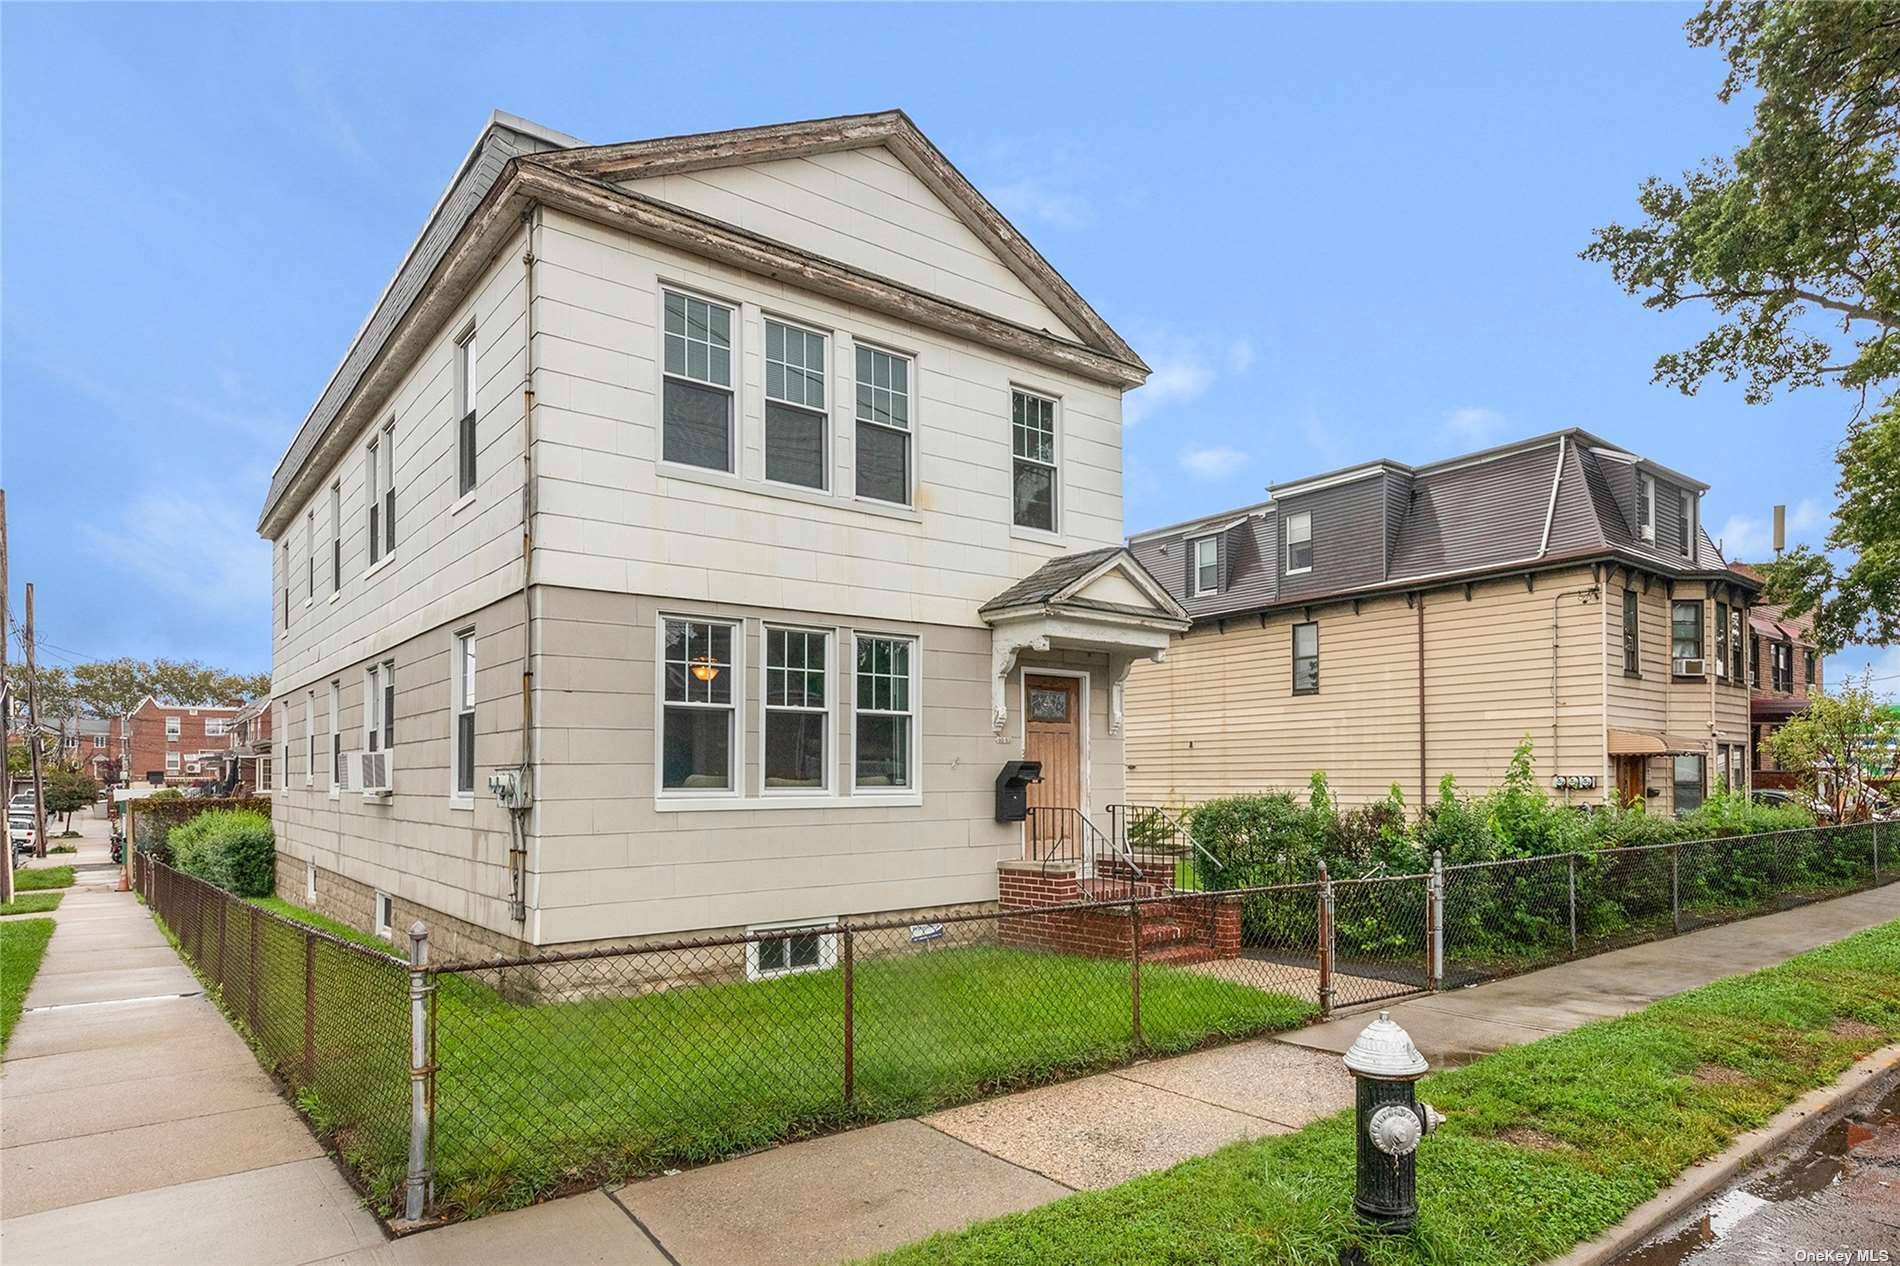 Welcome to this delightful 2 family corner home, nestled in the heart of Maspeth, Queens.